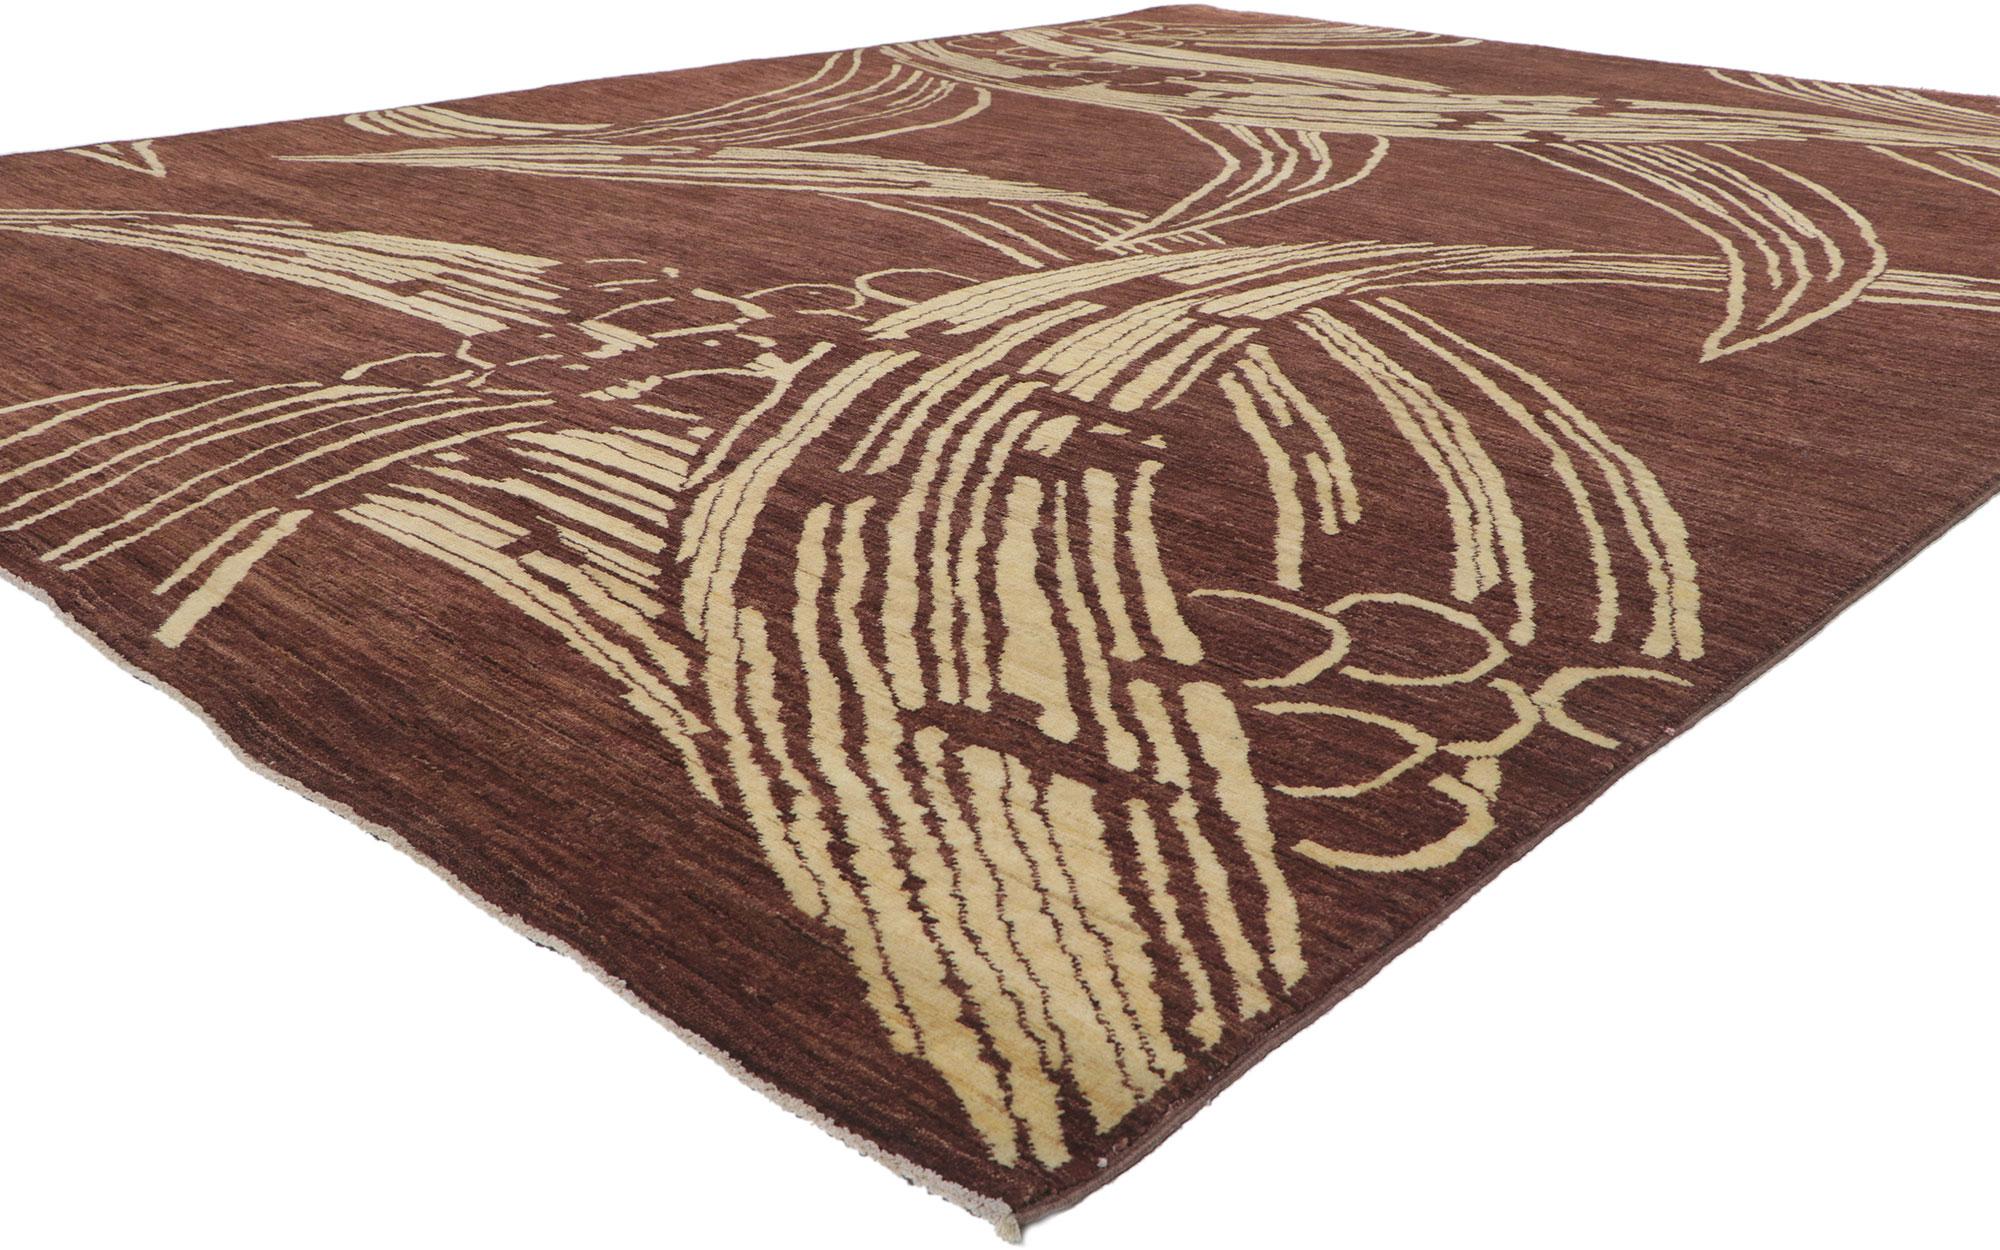 80740 New contemporary area rug with Biophilic Design and Modern Style, 08'07 x 11'07. With its modern style, incredible detail and texture, this hand knotted wool contemporary rug is a captivating vision of woven beauty. The eye-catching botanical